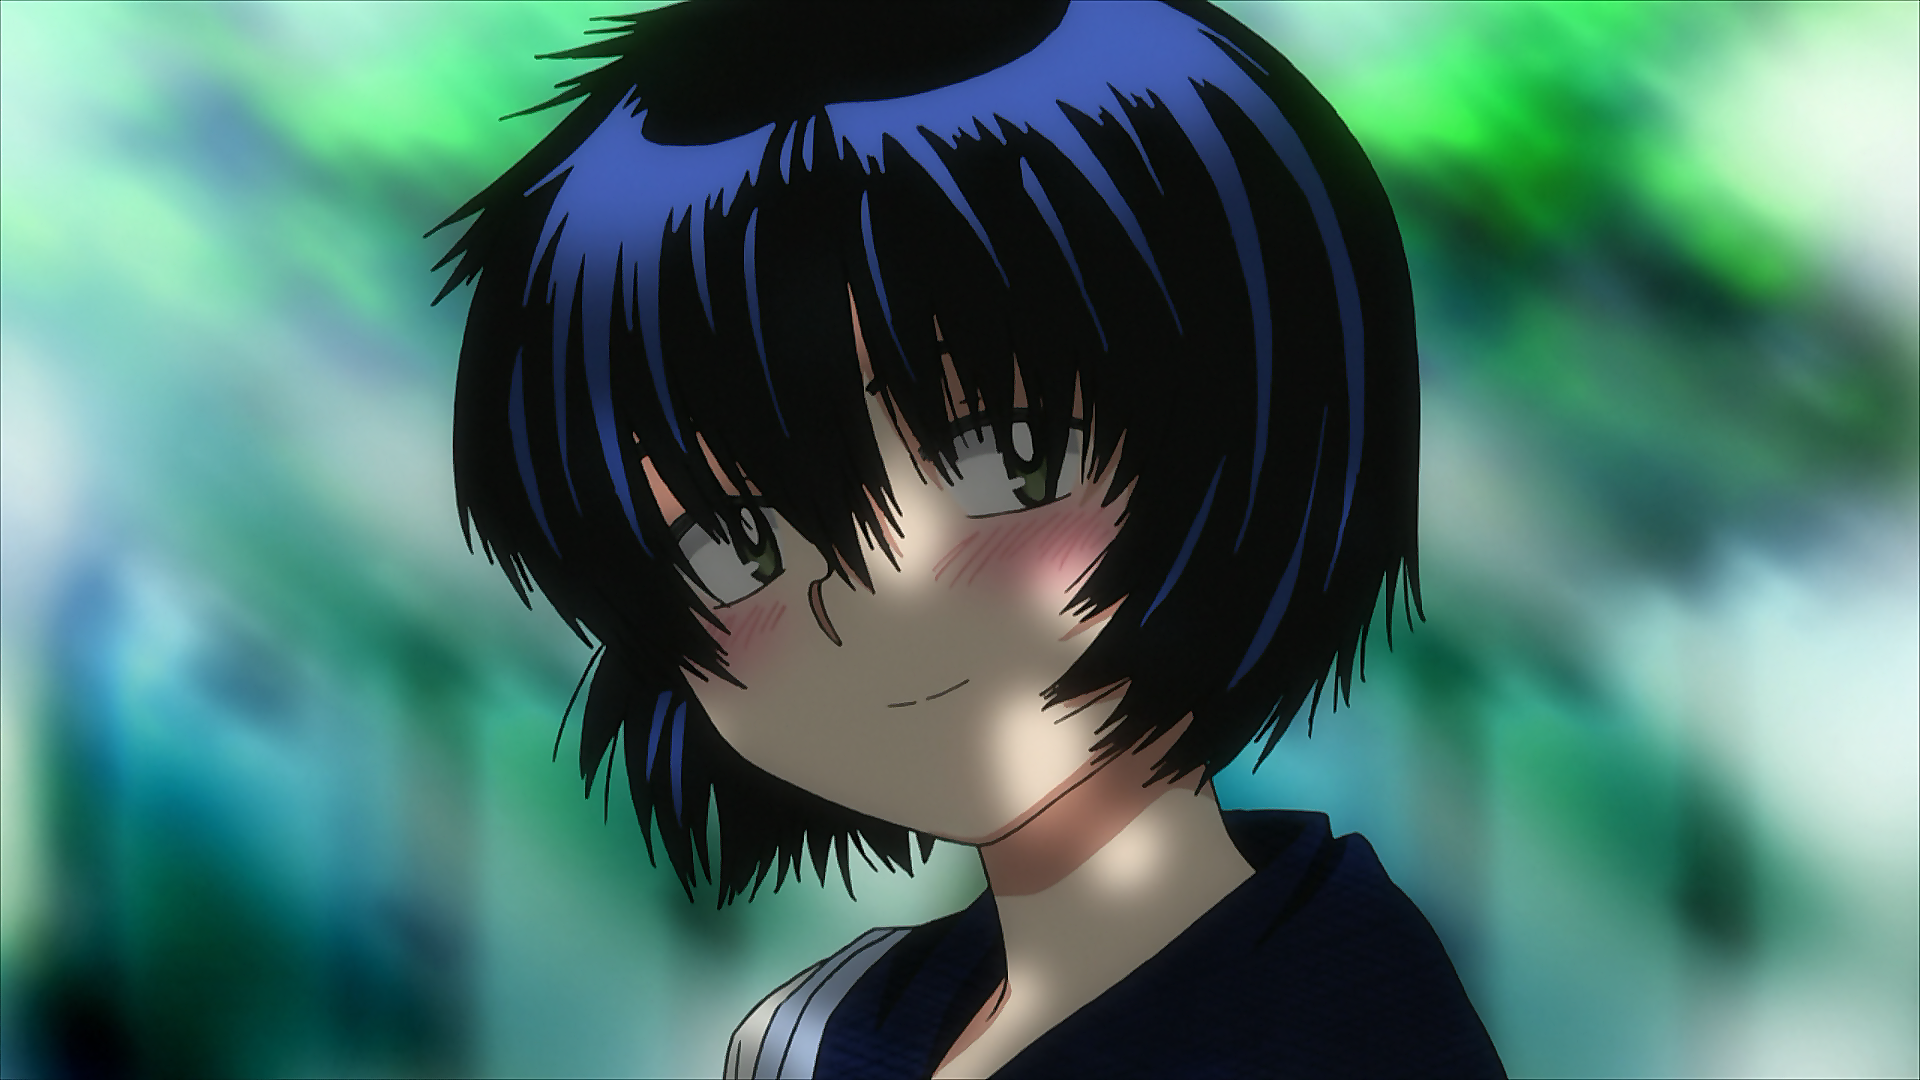 Mysterious Girlfriend X Images. 